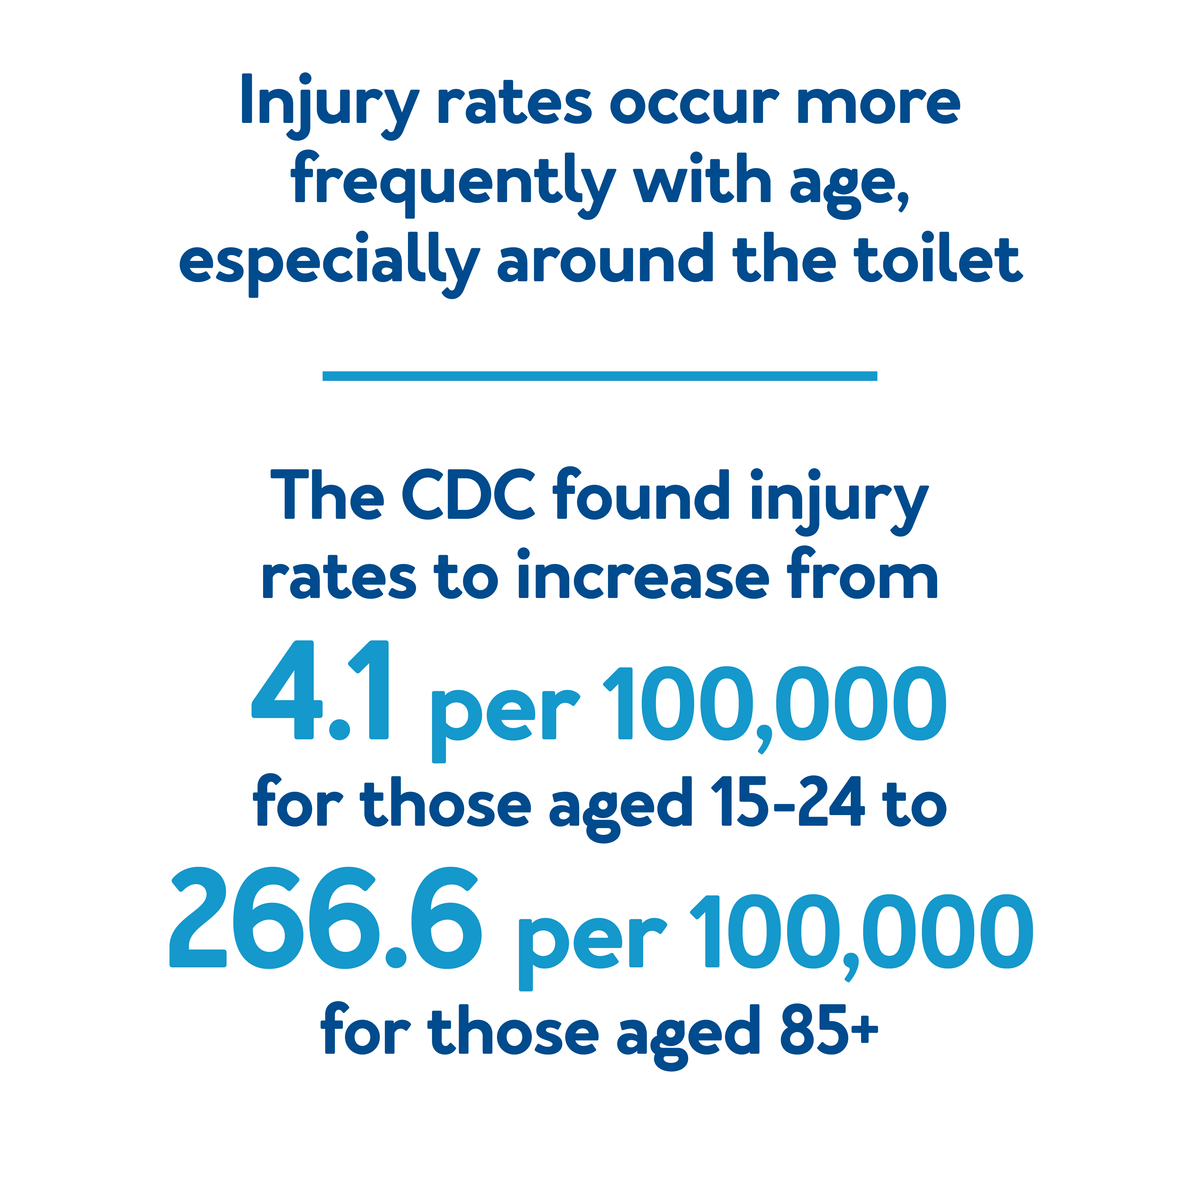 Injury rates occur more frequently with age, especially around the toilet. The CDC found injury rates to increase from 4.1 per 100,000 for those aged 15-24 to 266.6 per 100,000 for those aged 85+